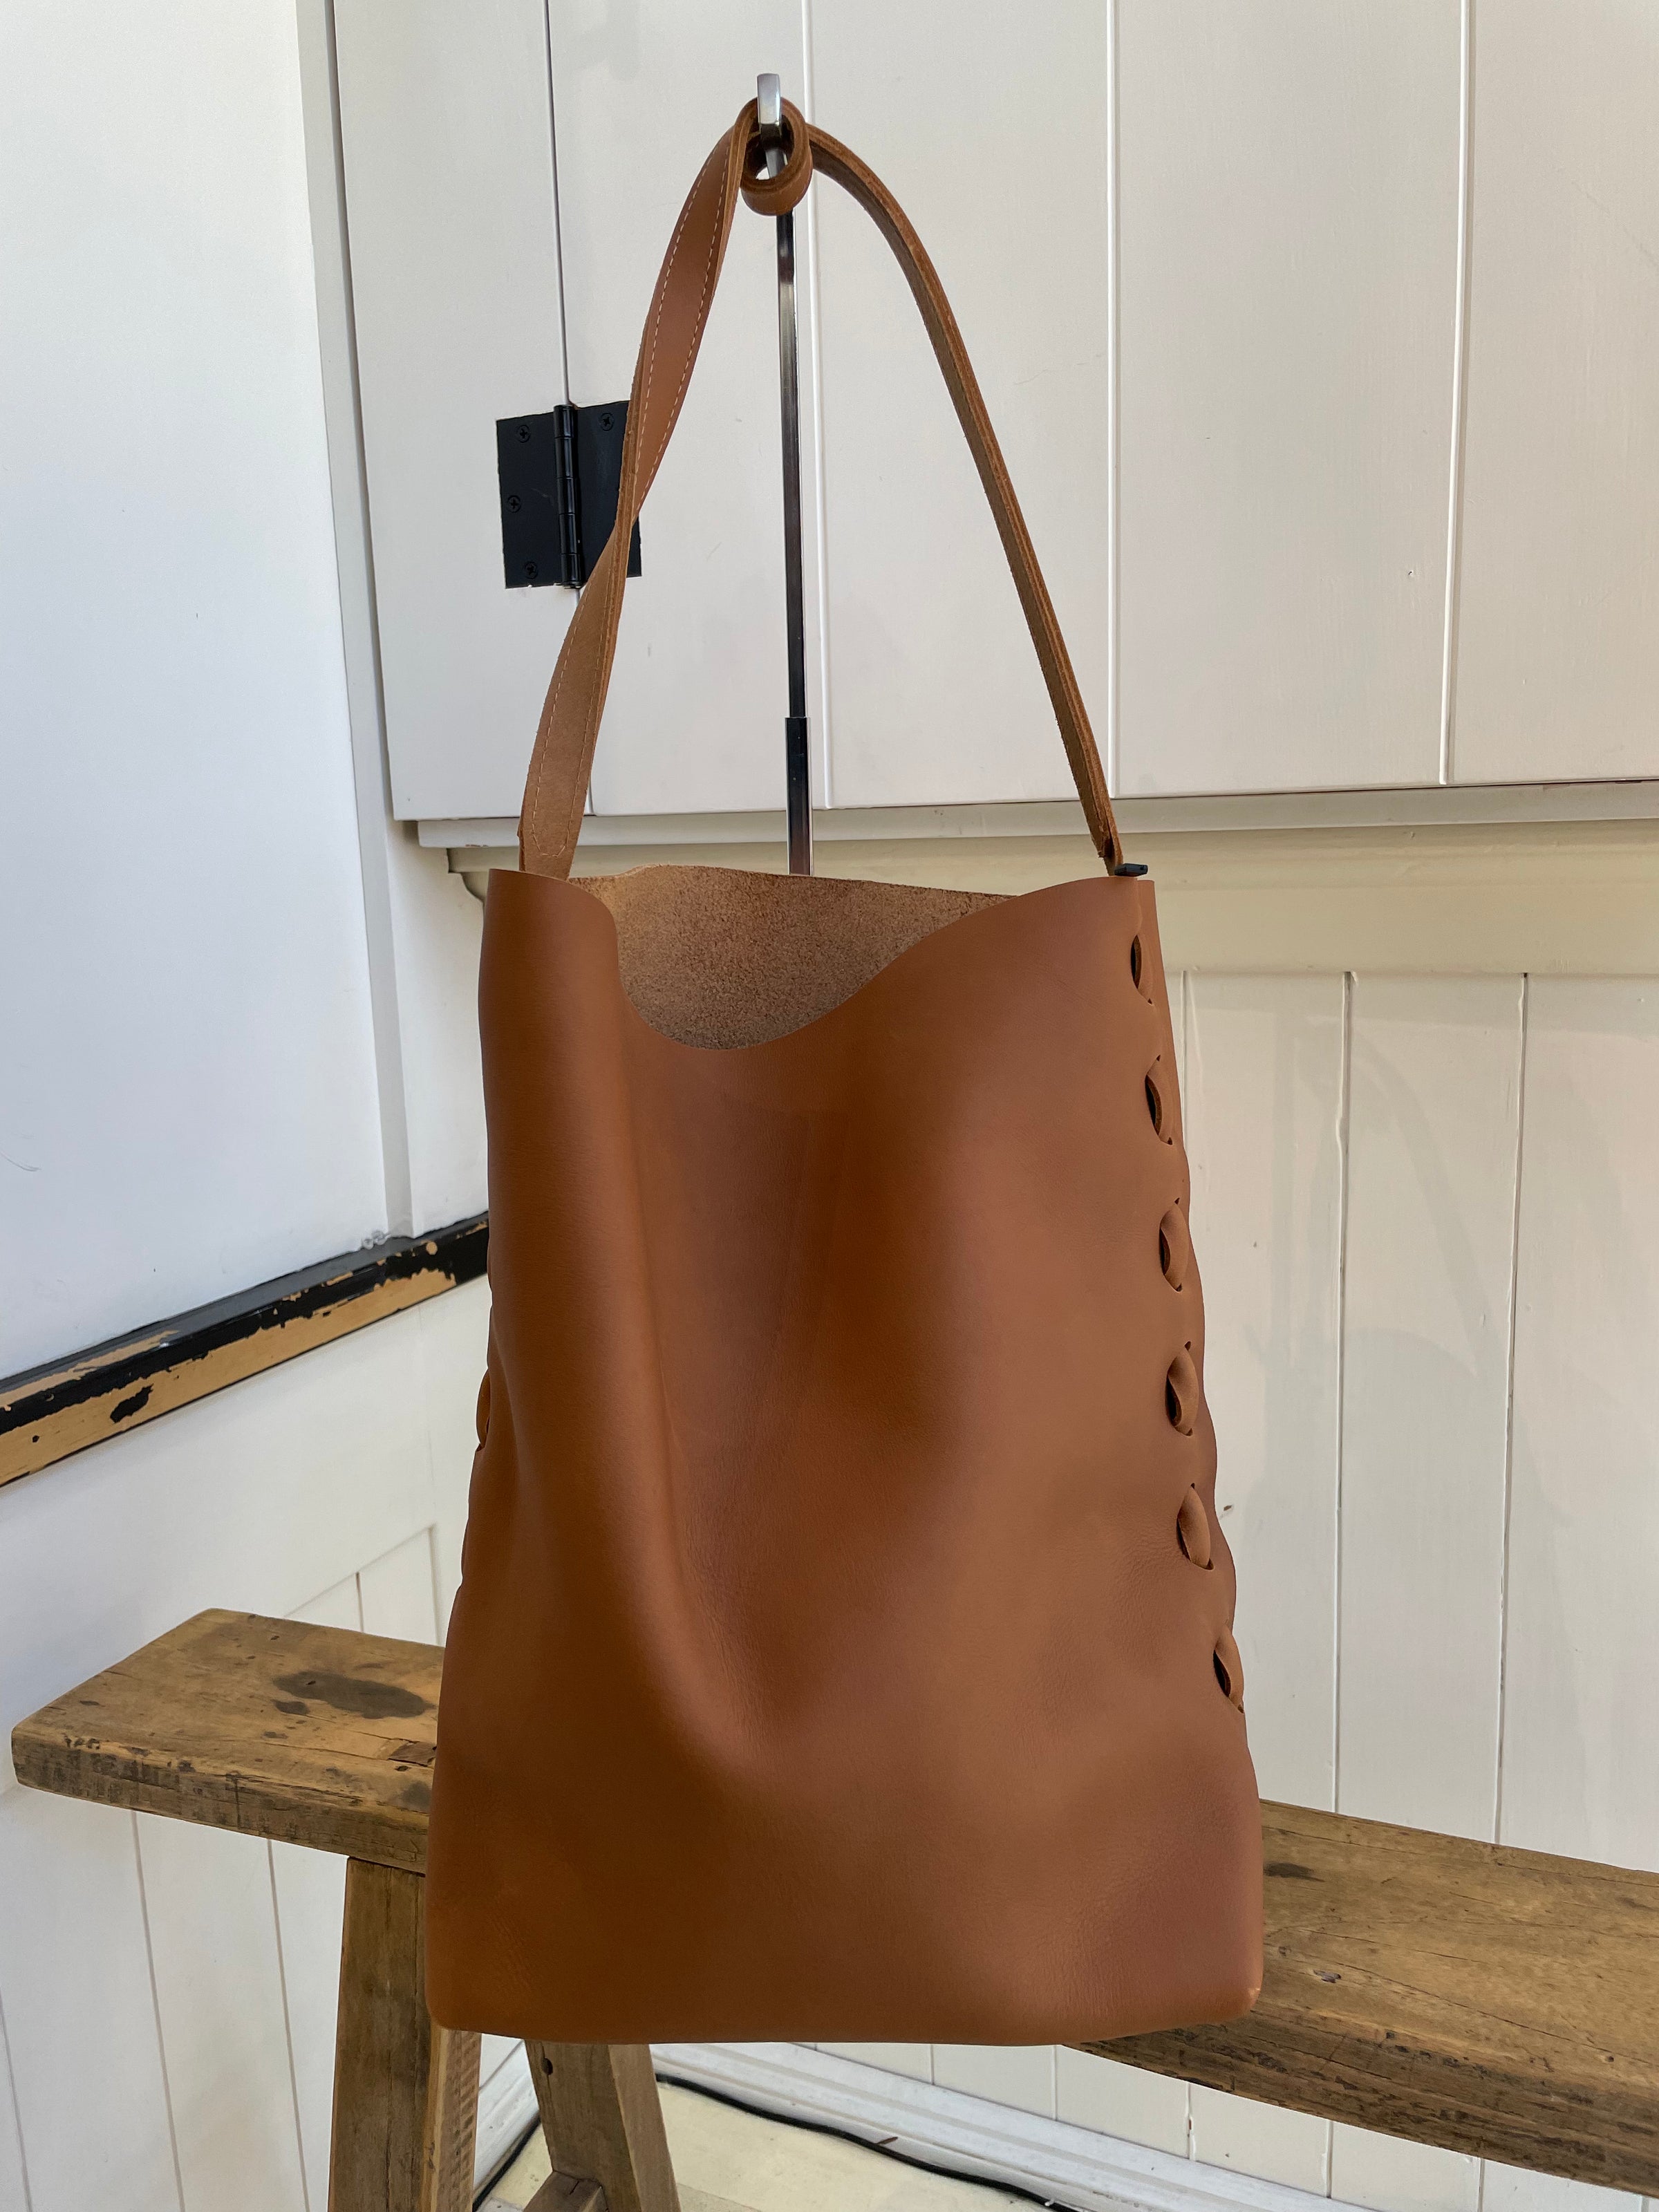 Market Canvas Leather Handbags - Laced Tote in Soft Brown